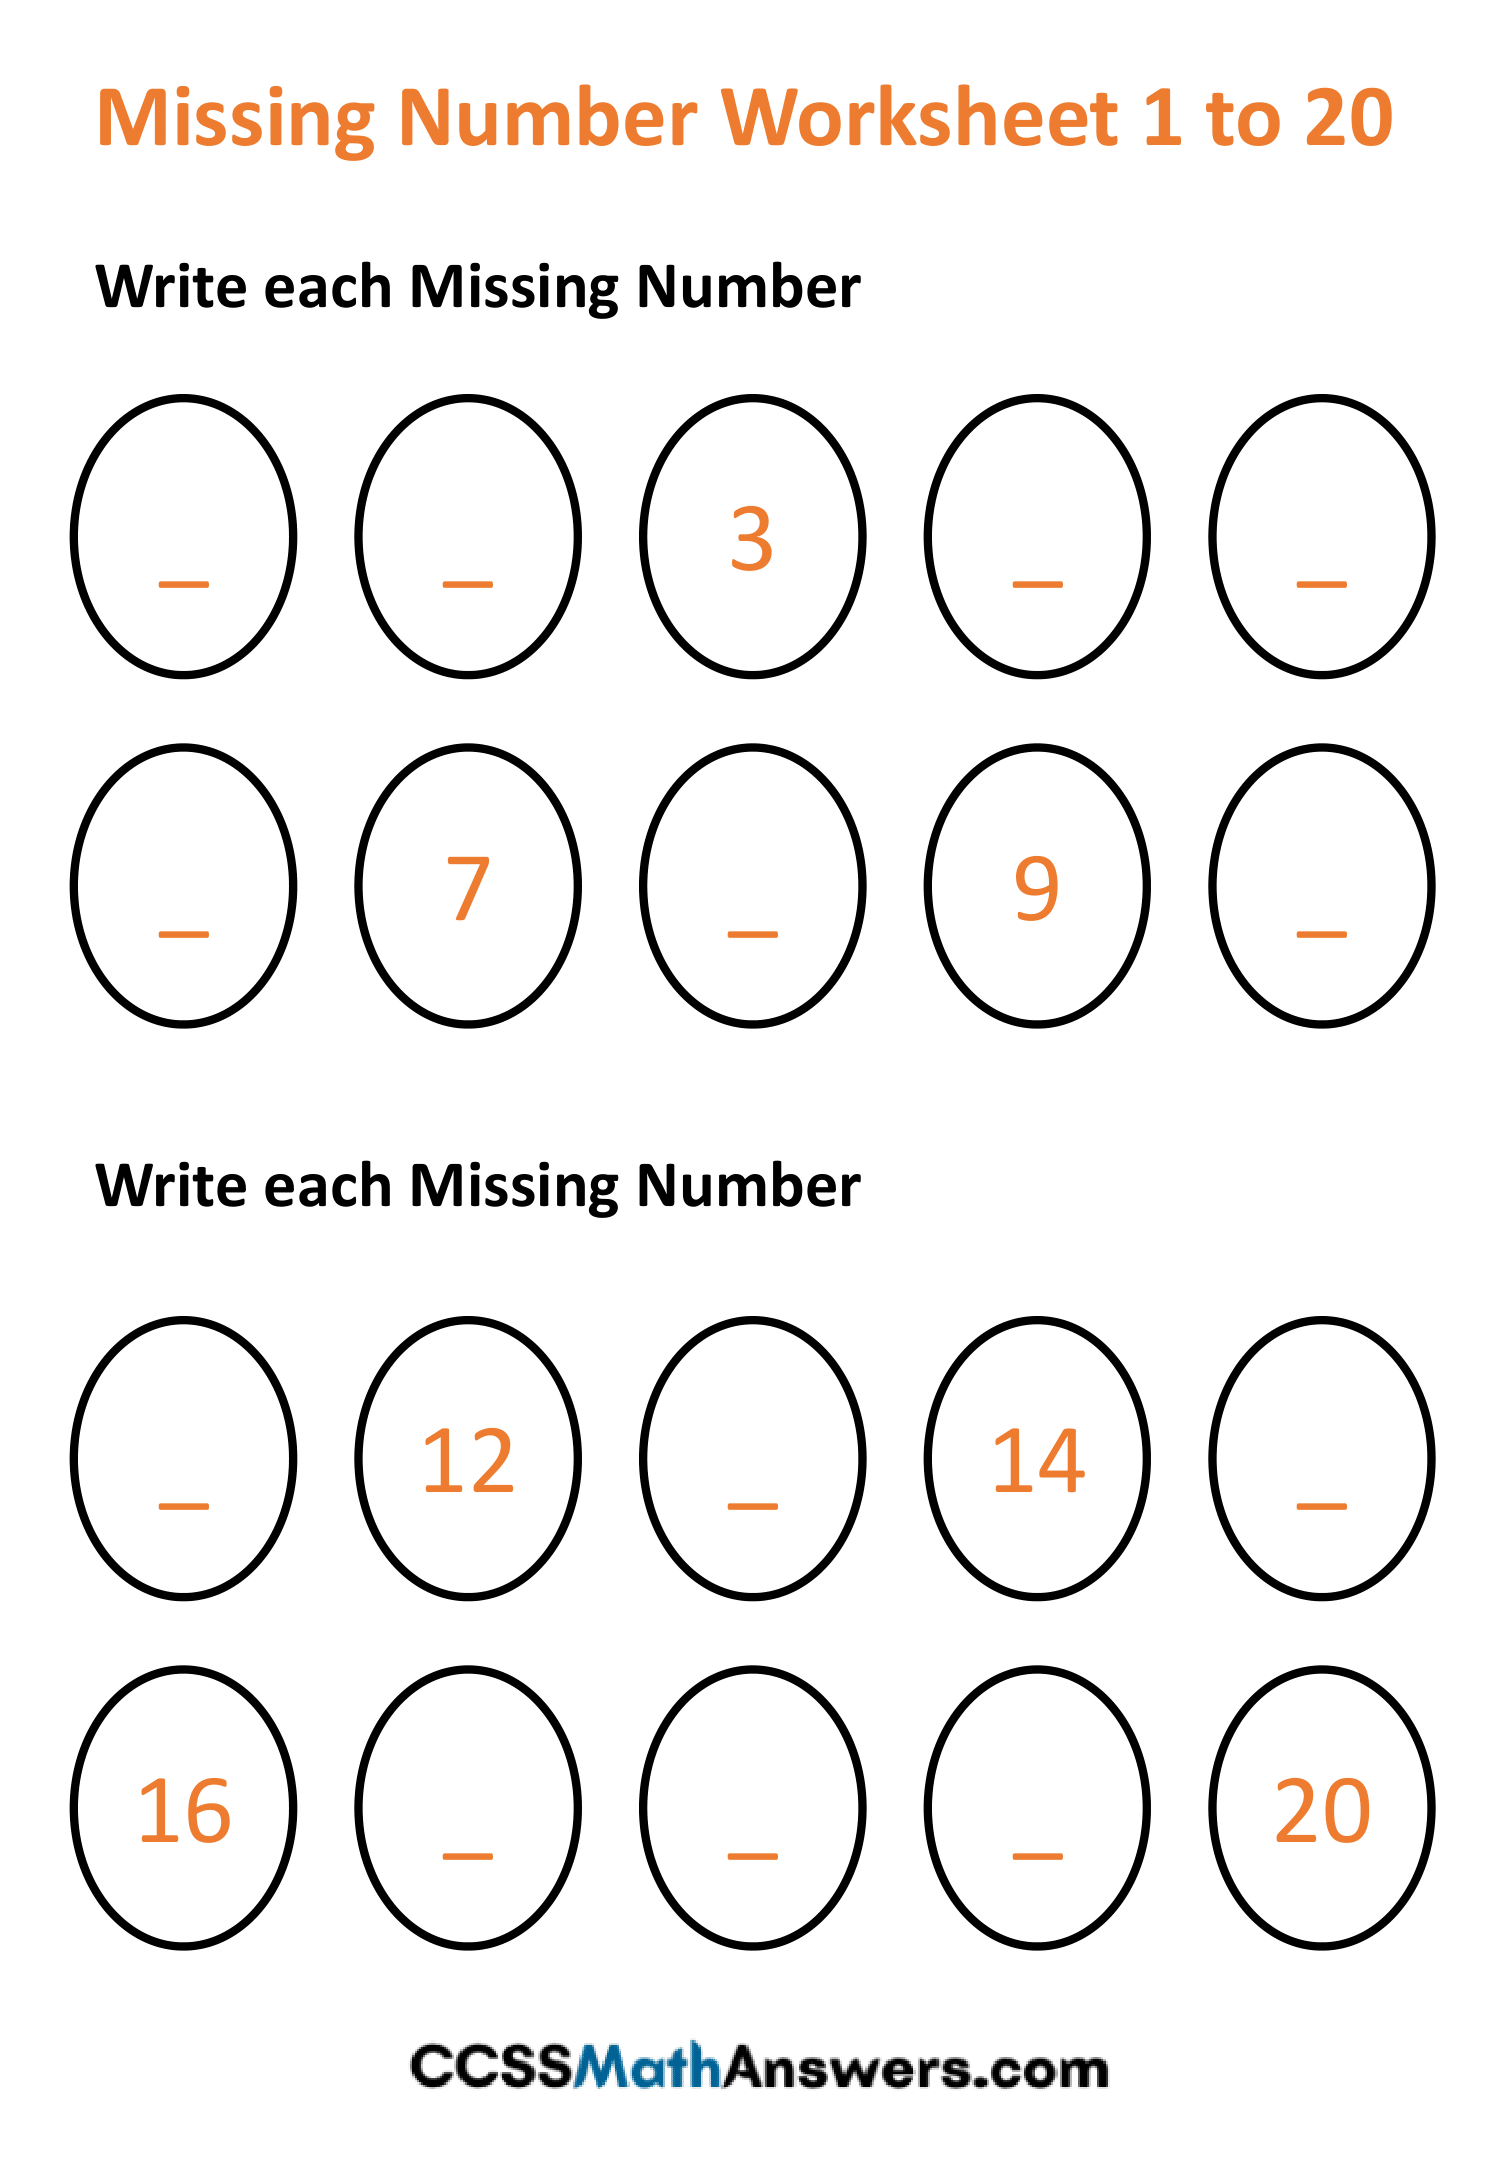 missing-number-worksheet-1-to-20-ccss-answers